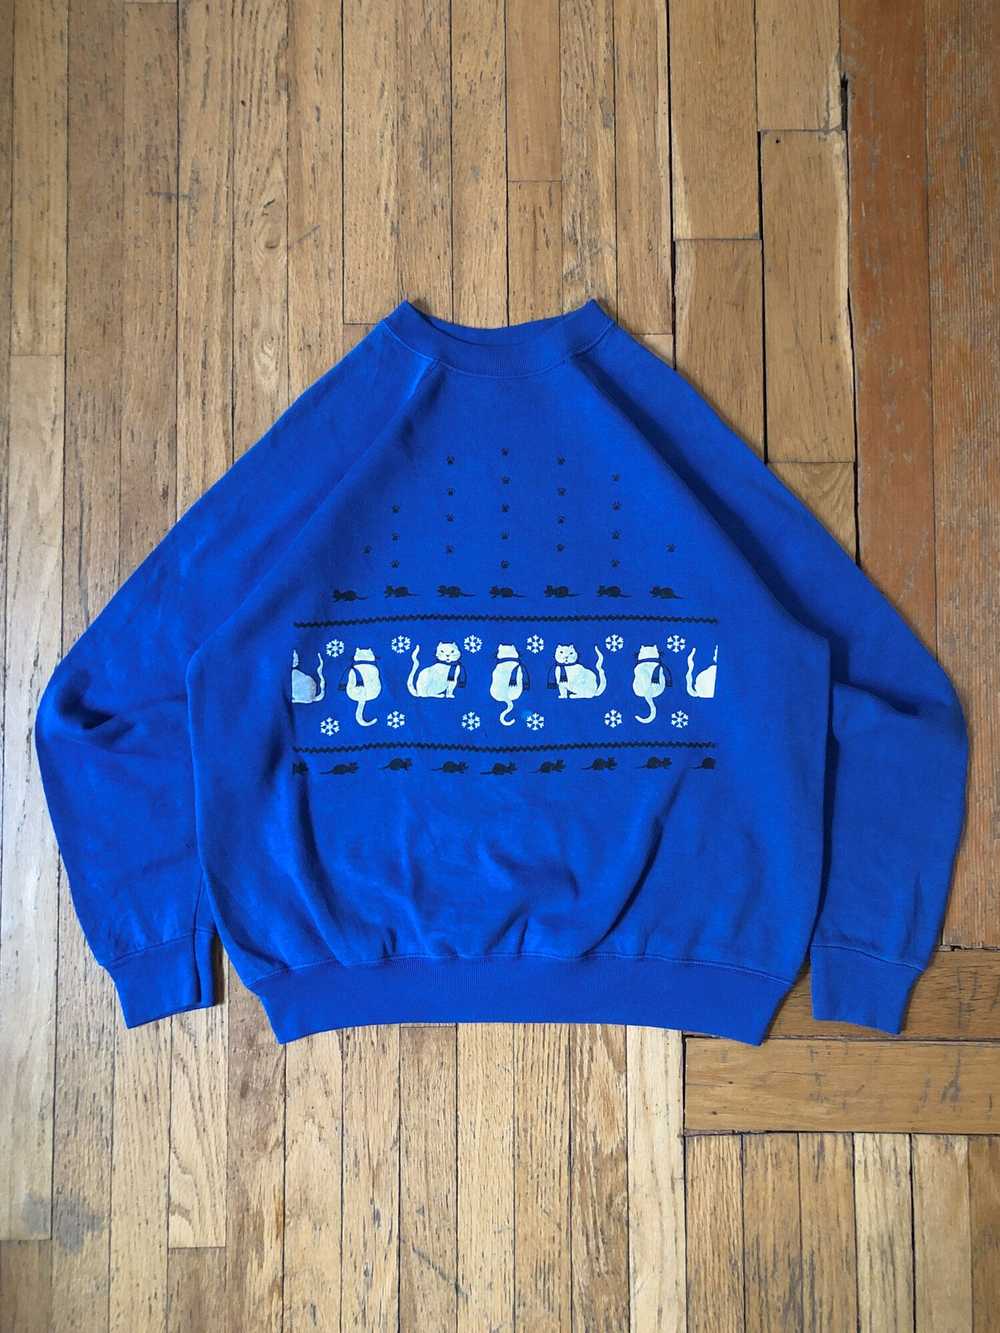 Made In Usa × Vintage 90s Boxy Faded Blue Cat Chr… - image 2